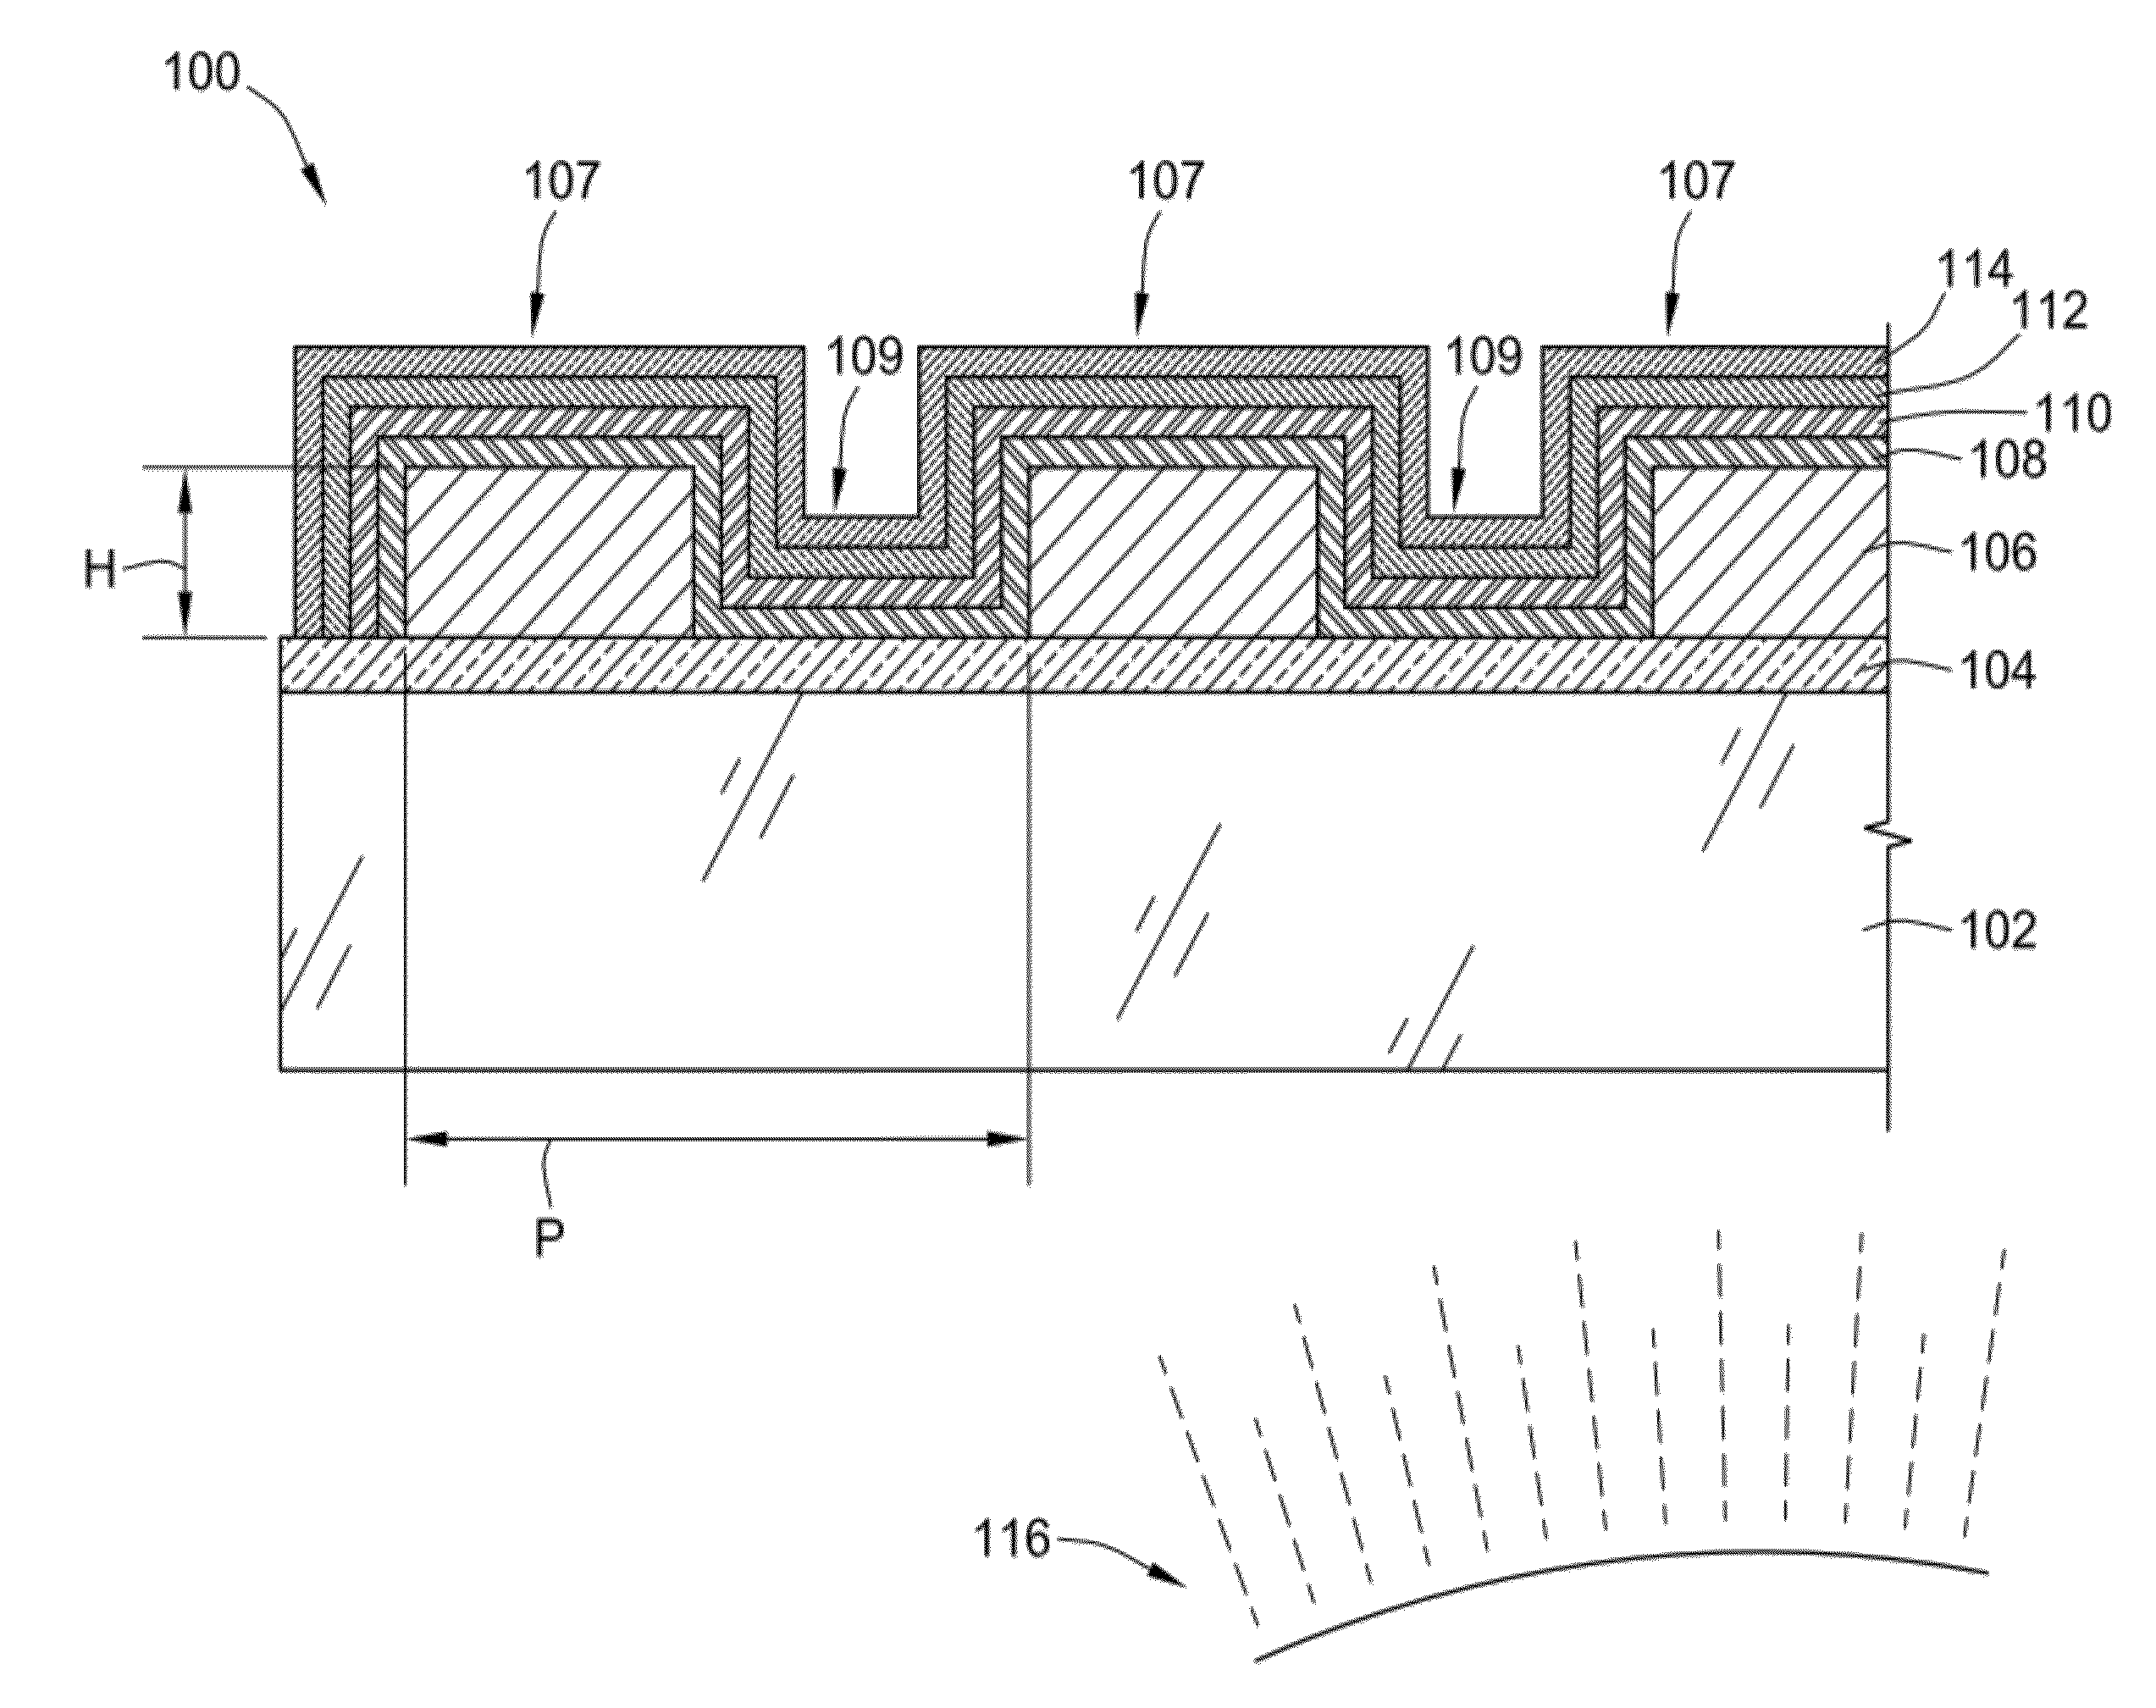 Textured Micrometer Scale Templates as Light Managing Fabrication Platform for Organic Solar Cells